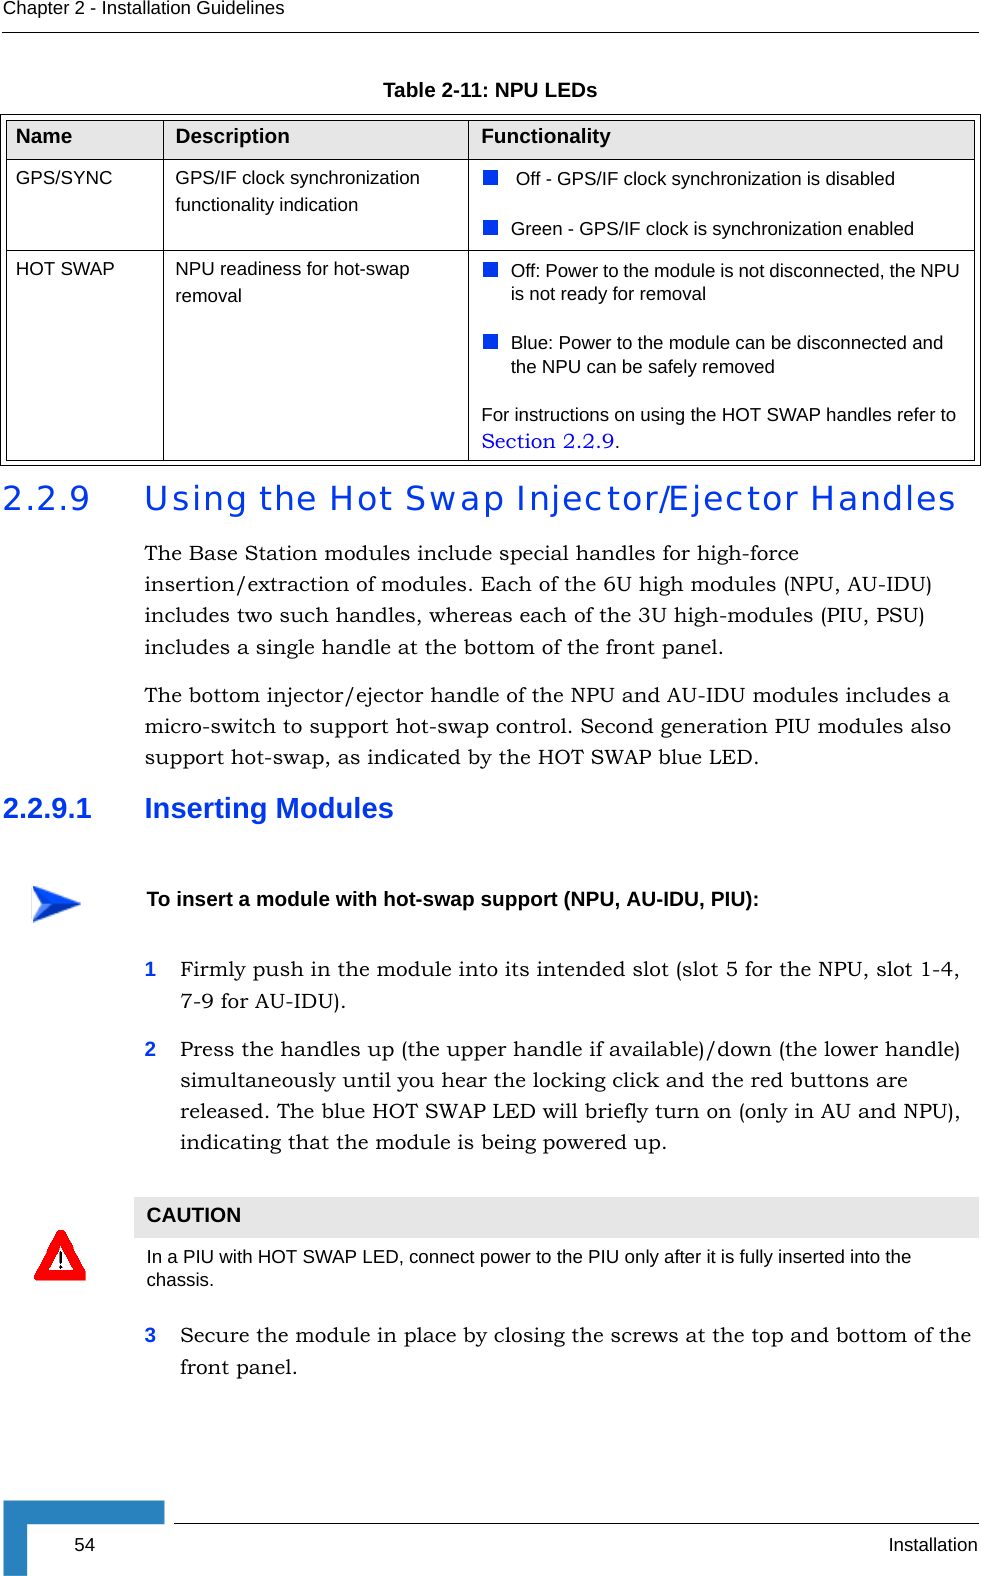 54 InstallationChapter 2 - Installation Guidelines2.2.9 Using the Hot Swap Injector/Ejector HandlesThe Base Station modules include special handles for high-force insertion/extraction of modules. Each of the 6U high modules (NPU, AU-IDU) includes two such handles, whereas each of the 3U high-modules (PIU, PSU) includes a single handle at the bottom of the front panel. The bottom injector/ejector handle of the NPU and AU-IDU modules includes a micro-switch to support hot-swap control. Second generation PIU modules also support hot-swap, as indicated by the HOT SWAP blue LED.2.2.9.1 Inserting Modules1Firmly push in the module into its intended slot (slot 5 for the NPU, slot 1-4, 7-9 for AU-IDU).2Press the handles up (the upper handle if available)/down (the lower handle) simultaneously until you hear the locking click and the red buttons are released. The blue HOT SWAP LED will briefly turn on (only in AU and NPU), indicating that the module is being powered up.3Secure the module in place by closing the screws at the top and bottom of the front panel.GPS/SYNC GPS/IF clock synchronization functionality indication Off - GPS/IF clock synchronization is disabledGreen - GPS/IF clock is synchronization enabledHOT SWAP NPU readiness for hot-swap removalOff: Power to the module is not disconnected, the NPU is not ready for removalBlue: Power to the module can be disconnected and the NPU can be safely removedFor instructions on using the HOT SWAP handles refer to Section 2.2.9.To insert a module with hot-swap support (NPU, AU-IDU, PIU):CAUTIONIn a PIU with HOT SWAP LED, connect power to the PIU only after it is fully inserted into the chassis.Table 2-11: NPU LEDsName  Description Functionality